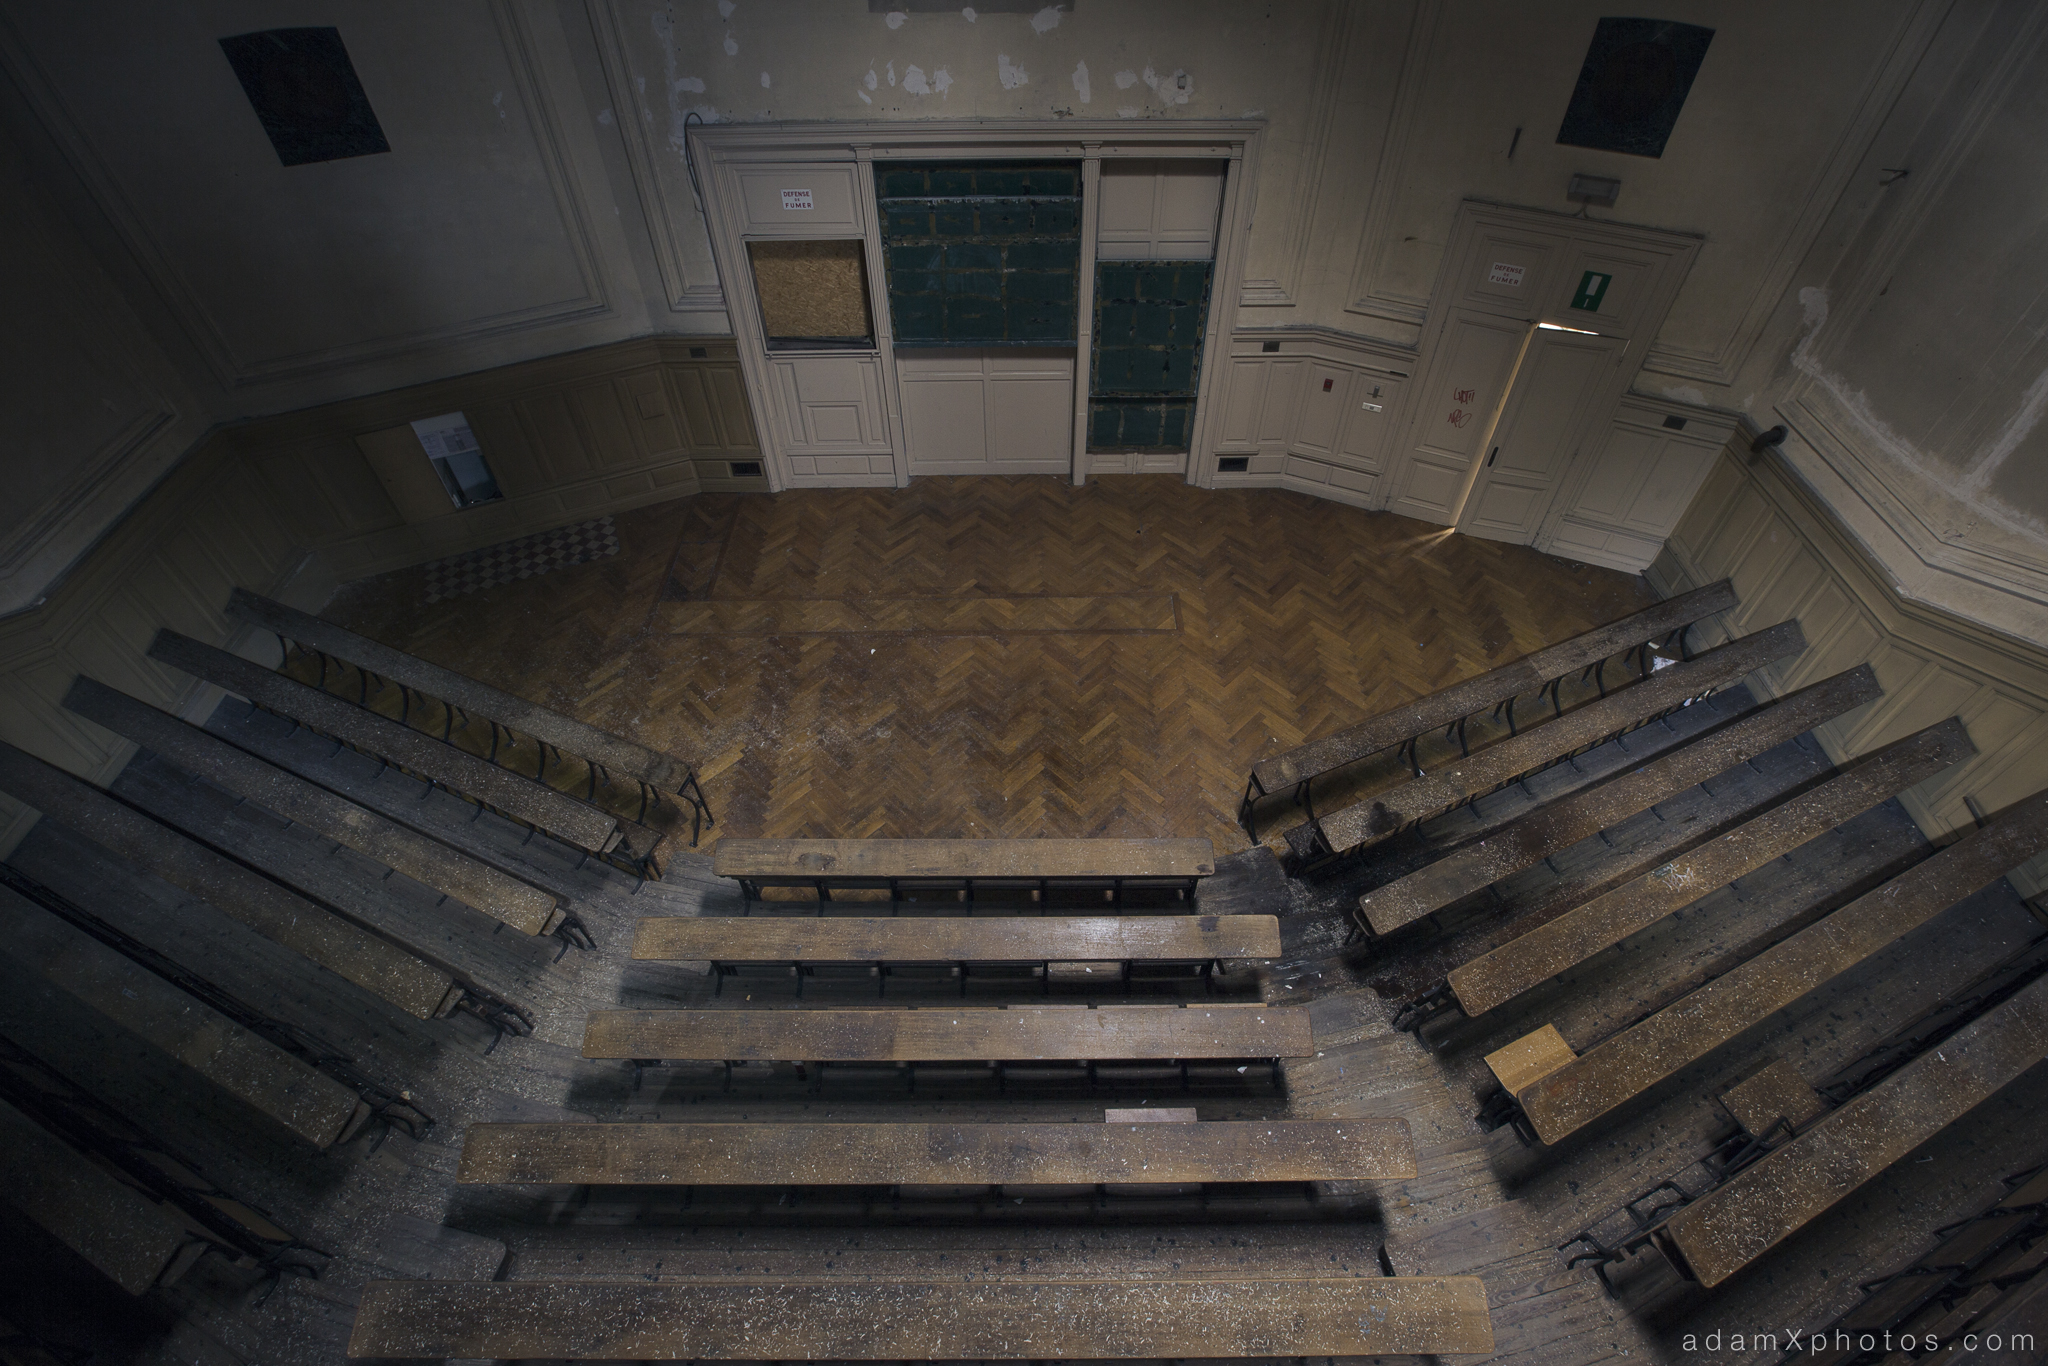 Main lecture theatre auditorium top view from above looking down Adam X Urbex UE Urban Exploration Belgium Pritzer Fac Pritzker Fac University College campus buildings abandoned derelict unused empty disused decay decayed decaying grimy grime